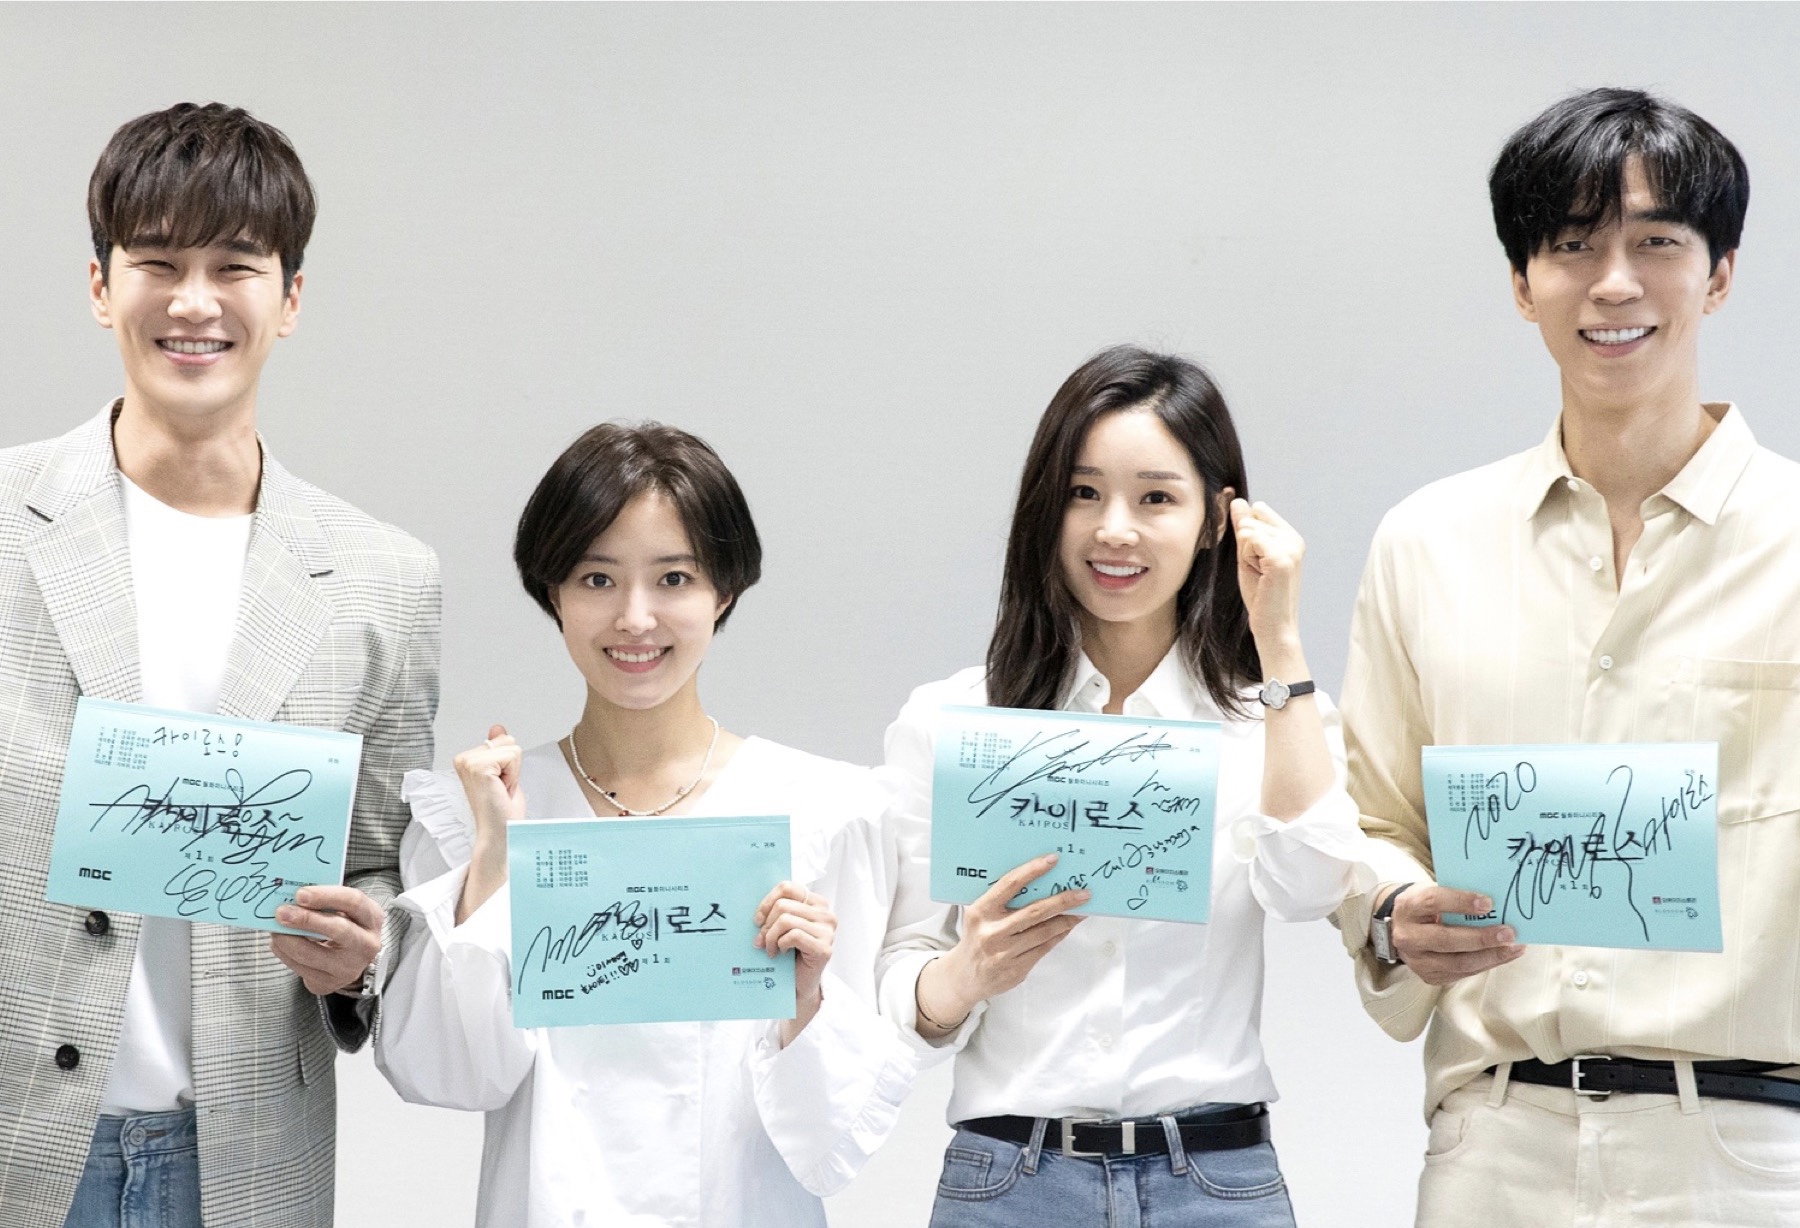 Upcoming MBC fantasy thriller release script reading with the cast member